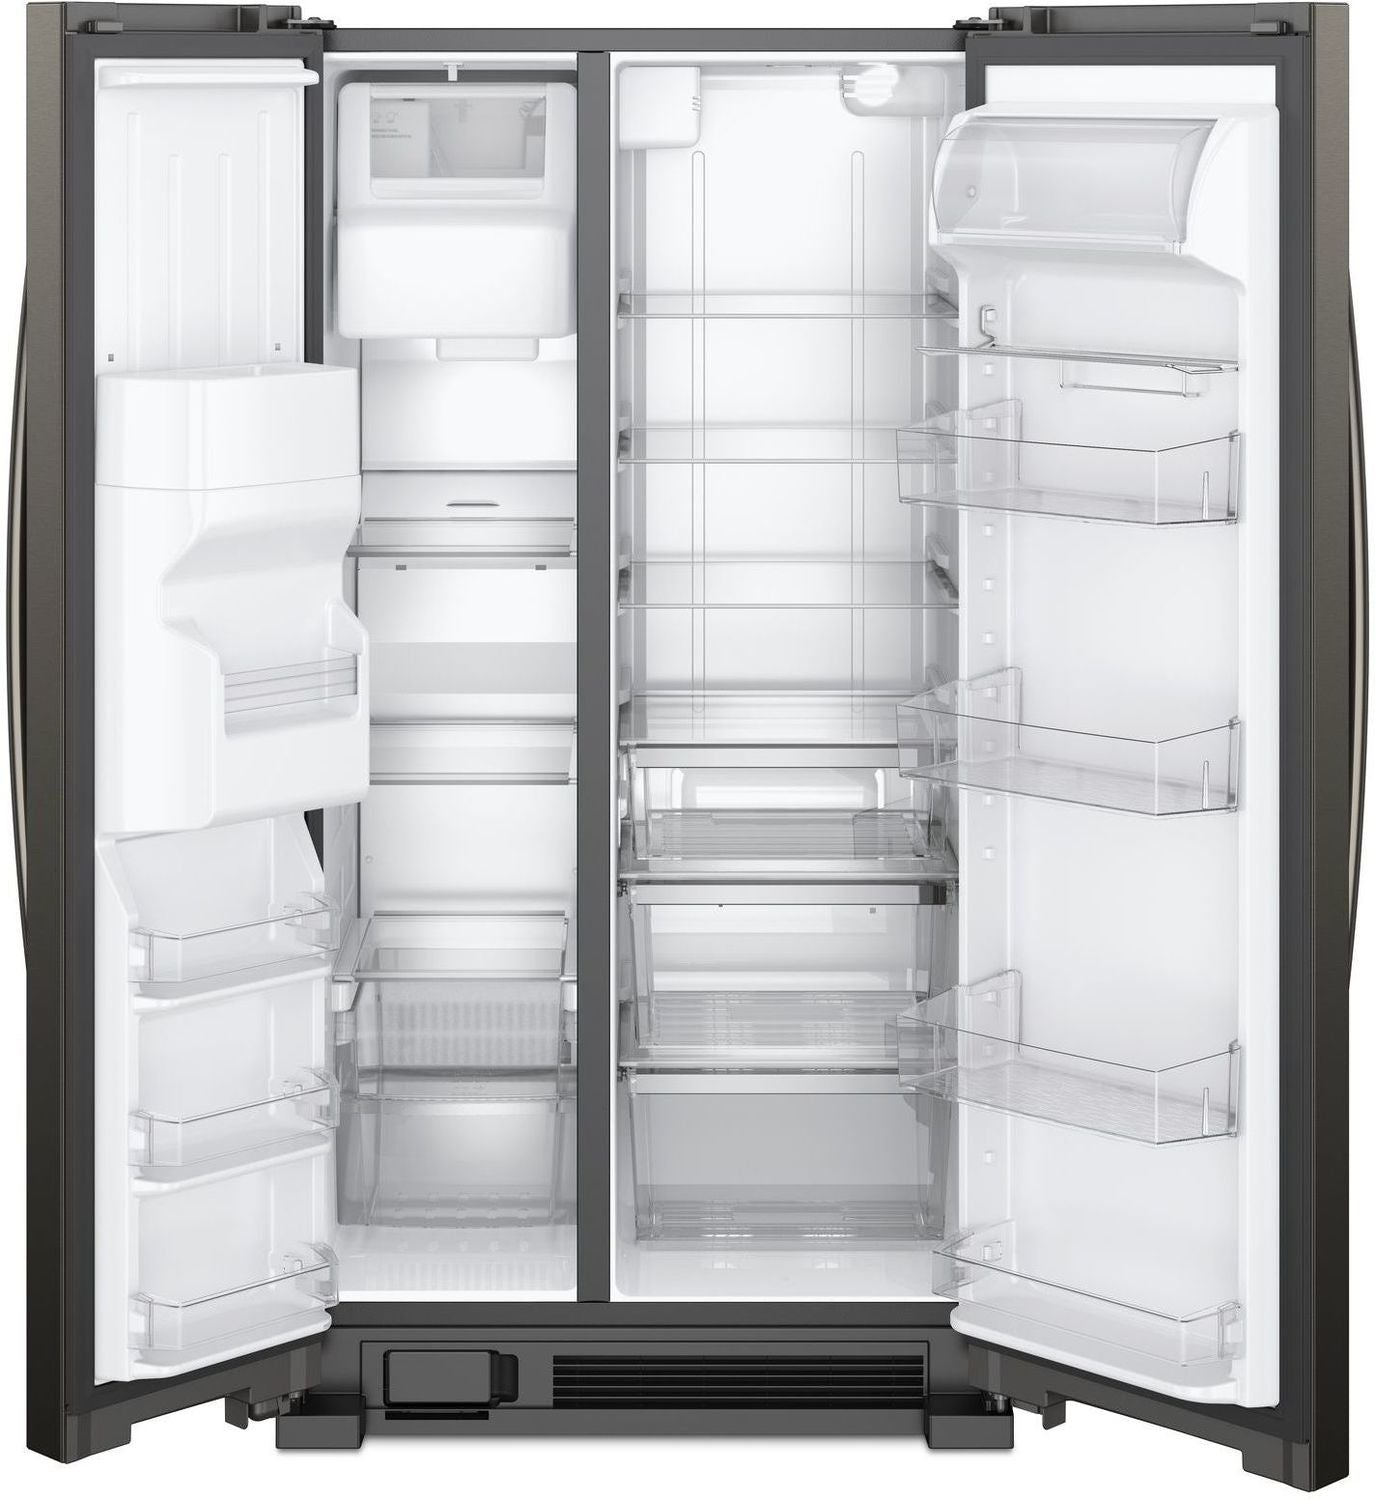 Whirlpool Black Stainless Steel Side-by-Side Refrigerator (25 Cu. Ft.) - WRS325SDHV